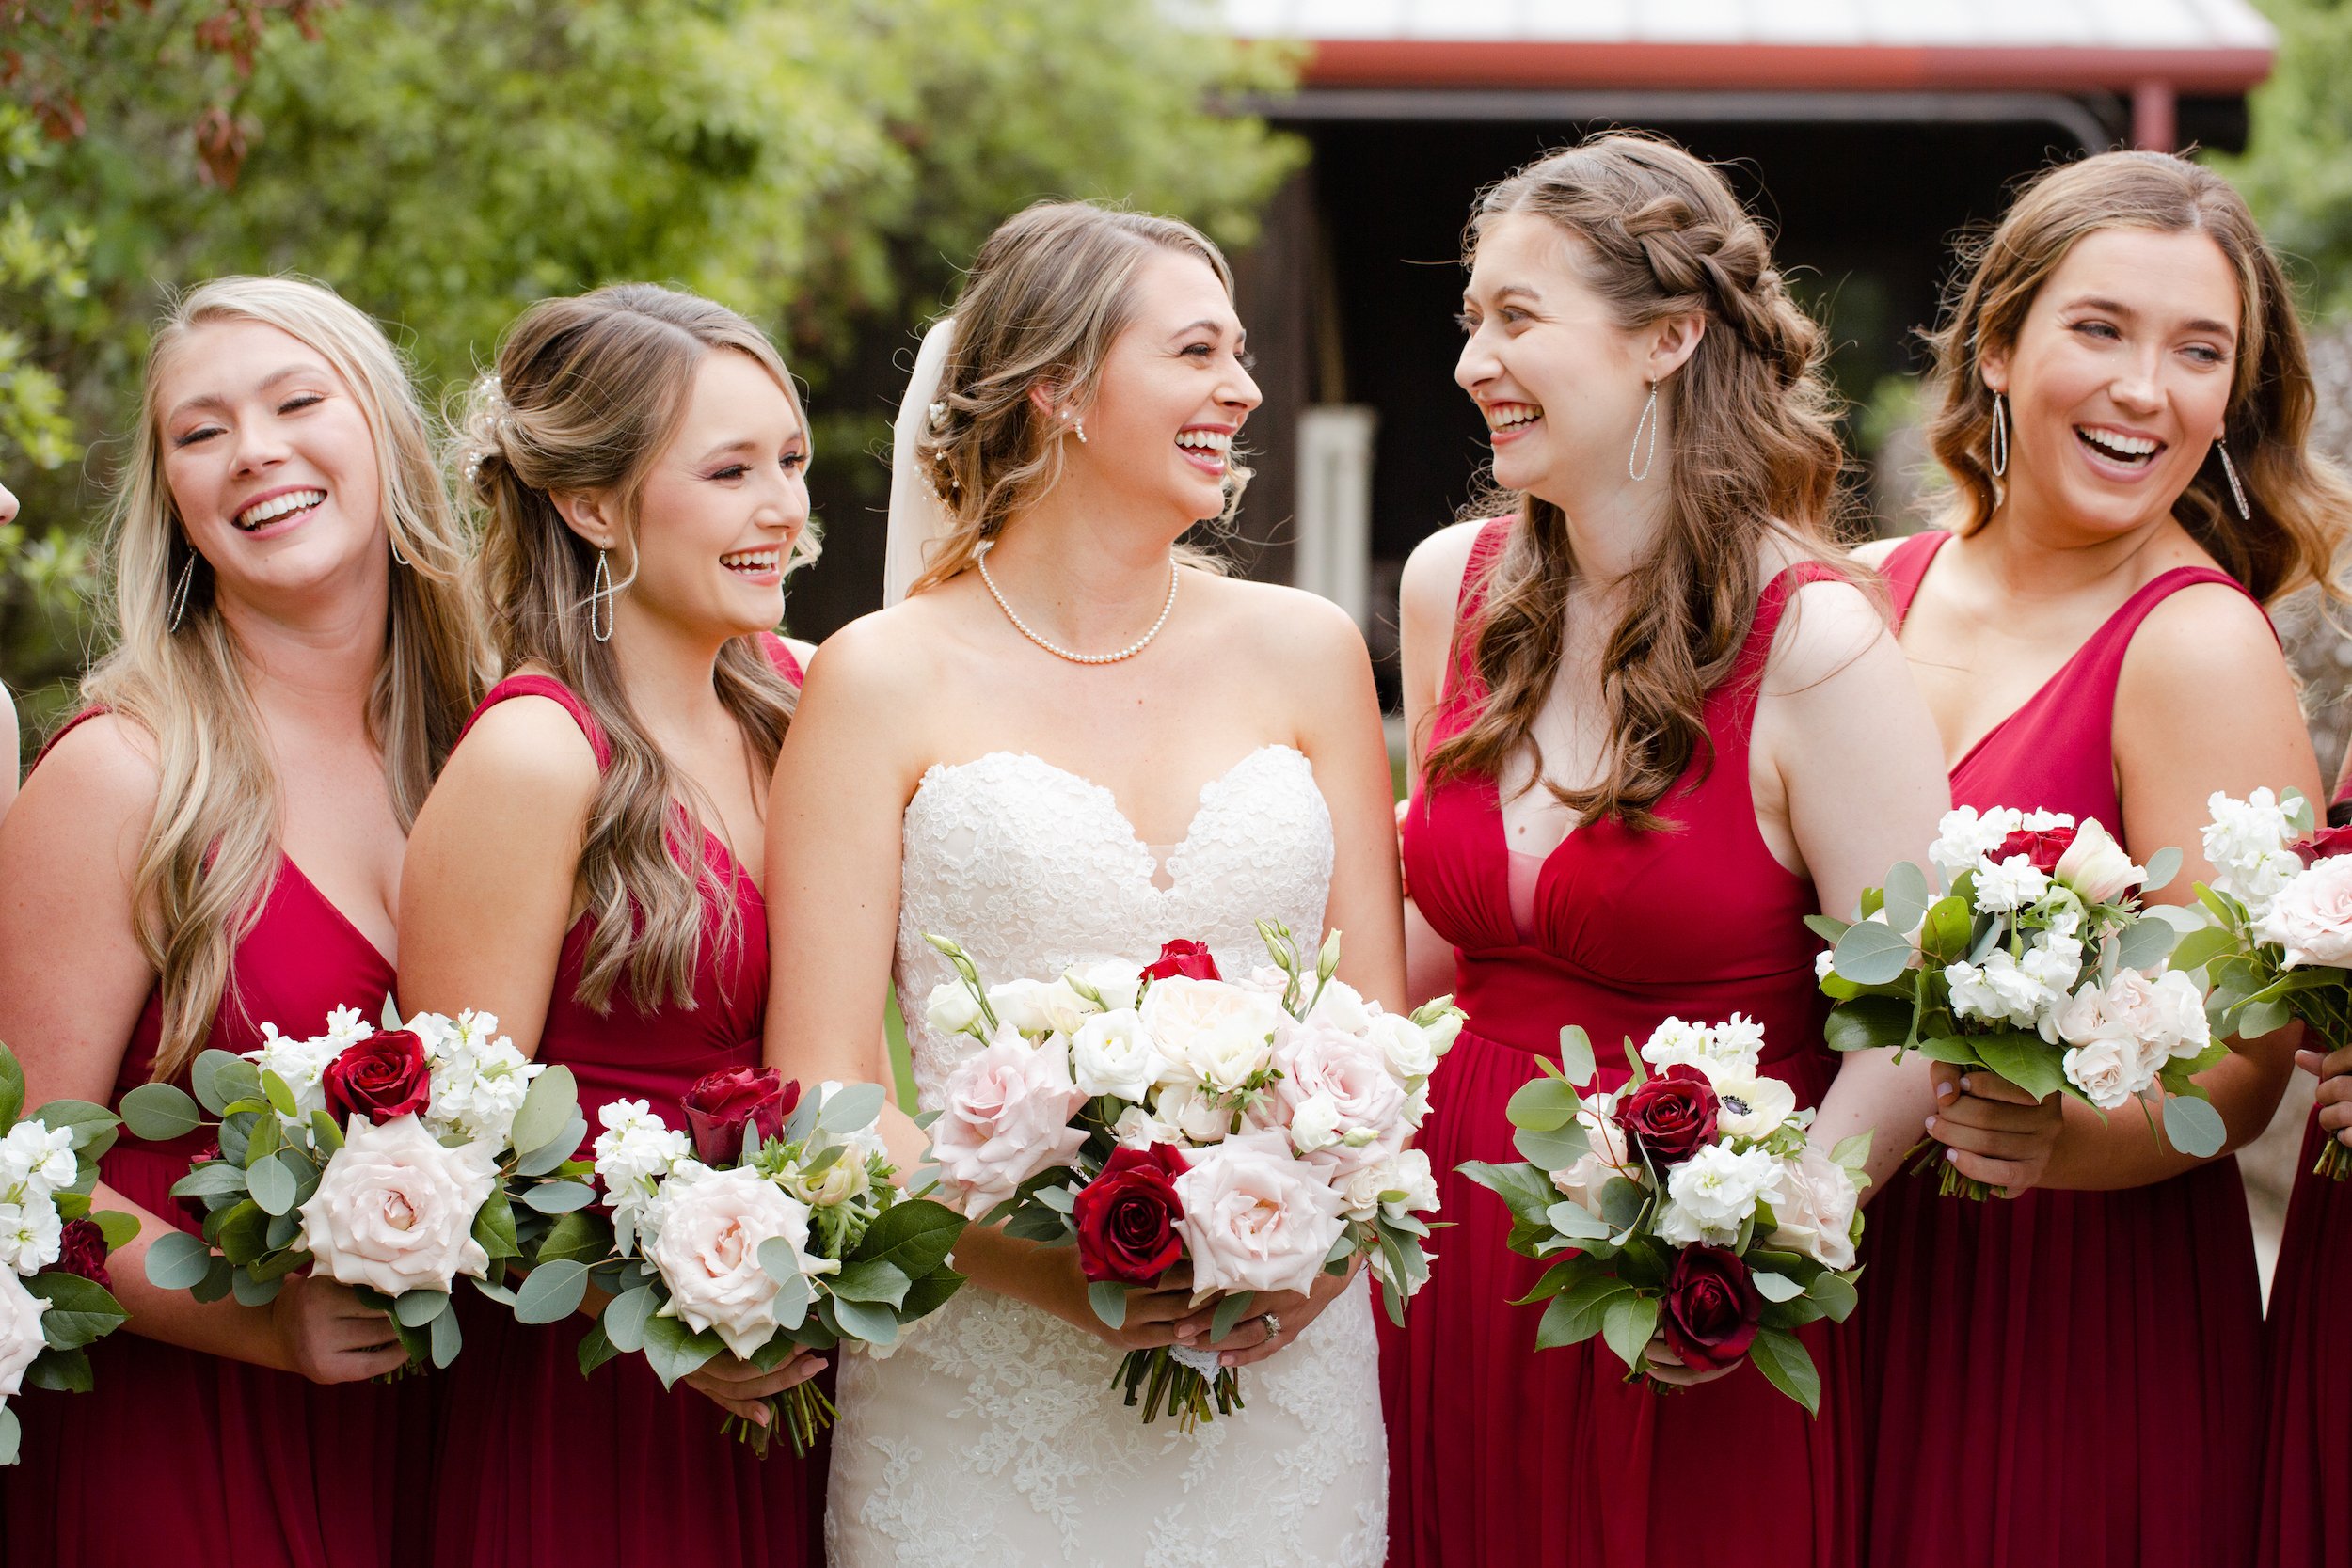 The bride smiles with her bridesmaids and they are all holding their burgundy and blush flower bouquets.